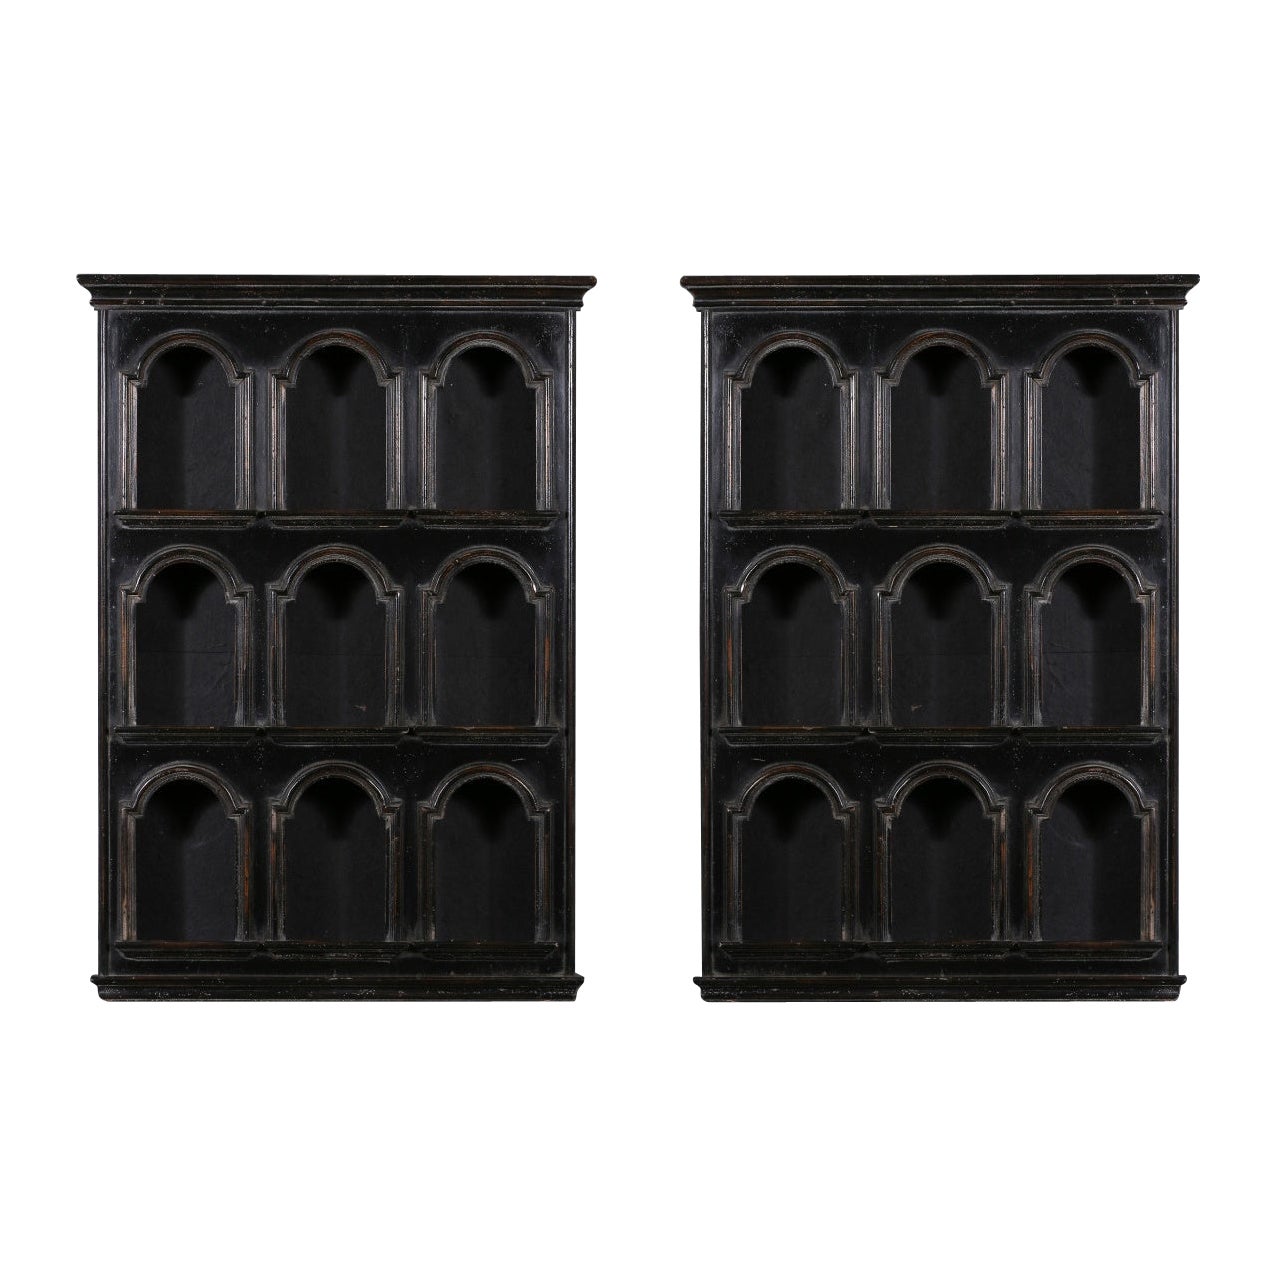 Pair of Small Curiosity Wall Units or Small Bookcases, 20th Century. For Sale